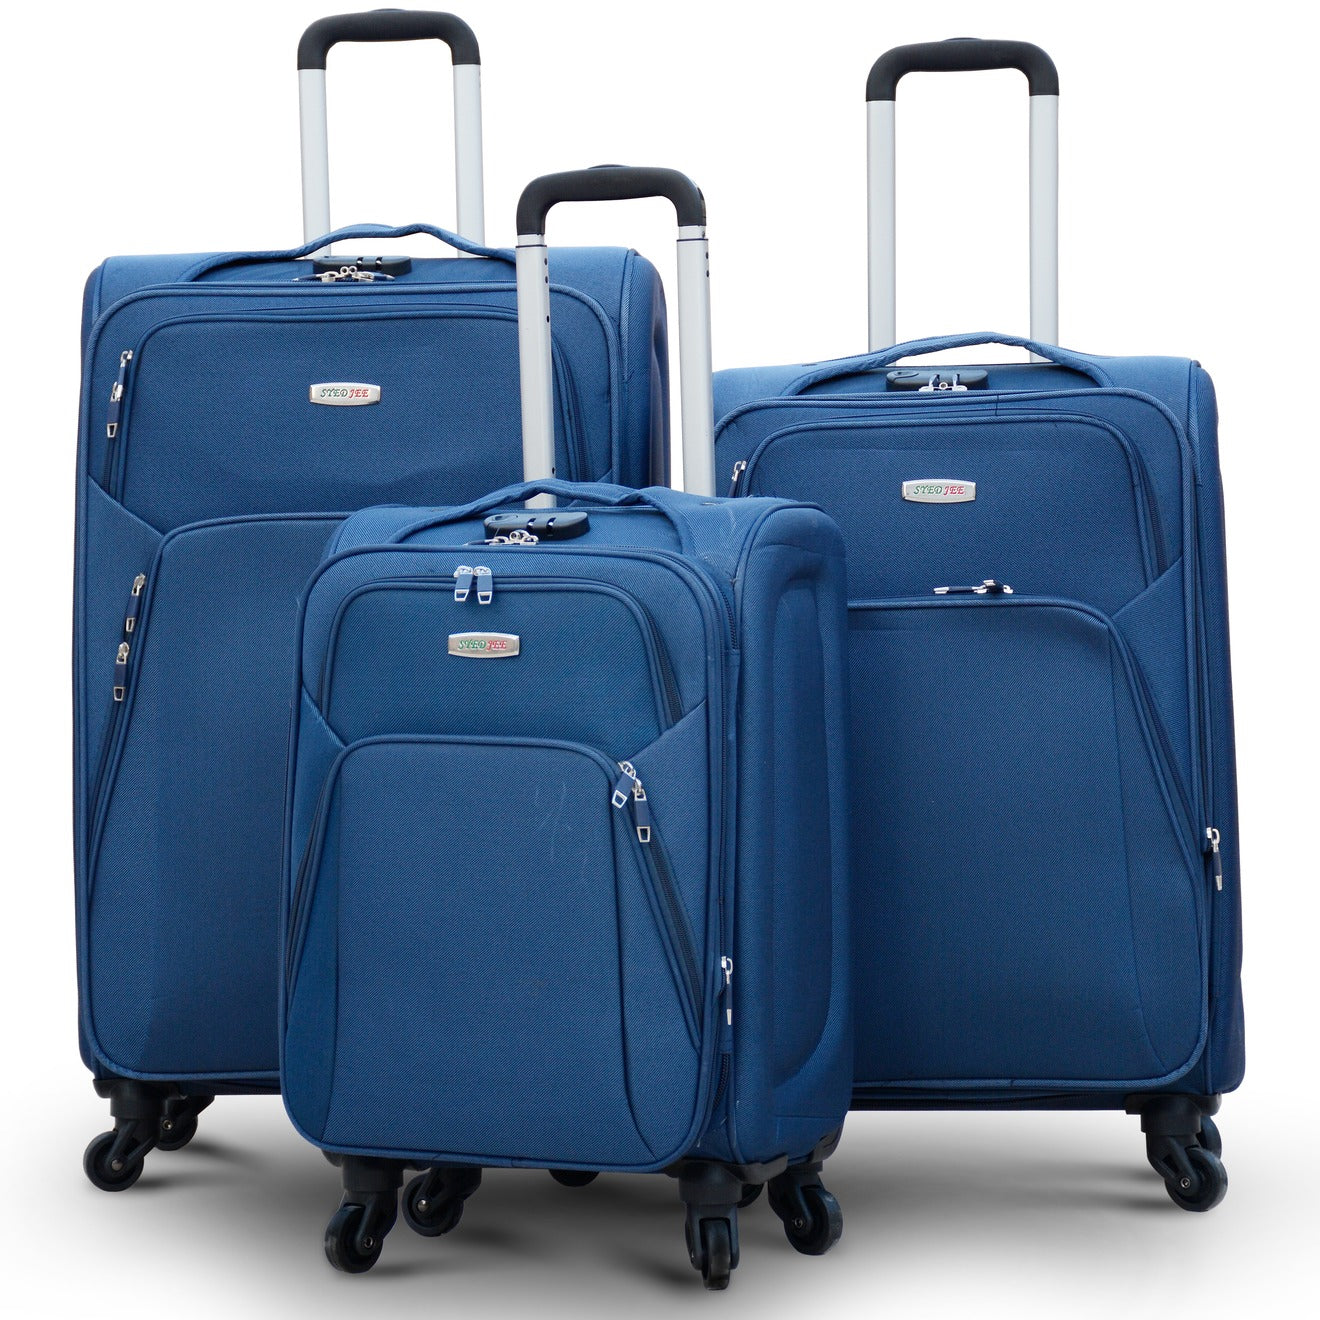 4 Pcs Set 20” 24” 28" 32 Inches Blue 4 Wheels Soft Material Luggage Lightweight Soft Shell